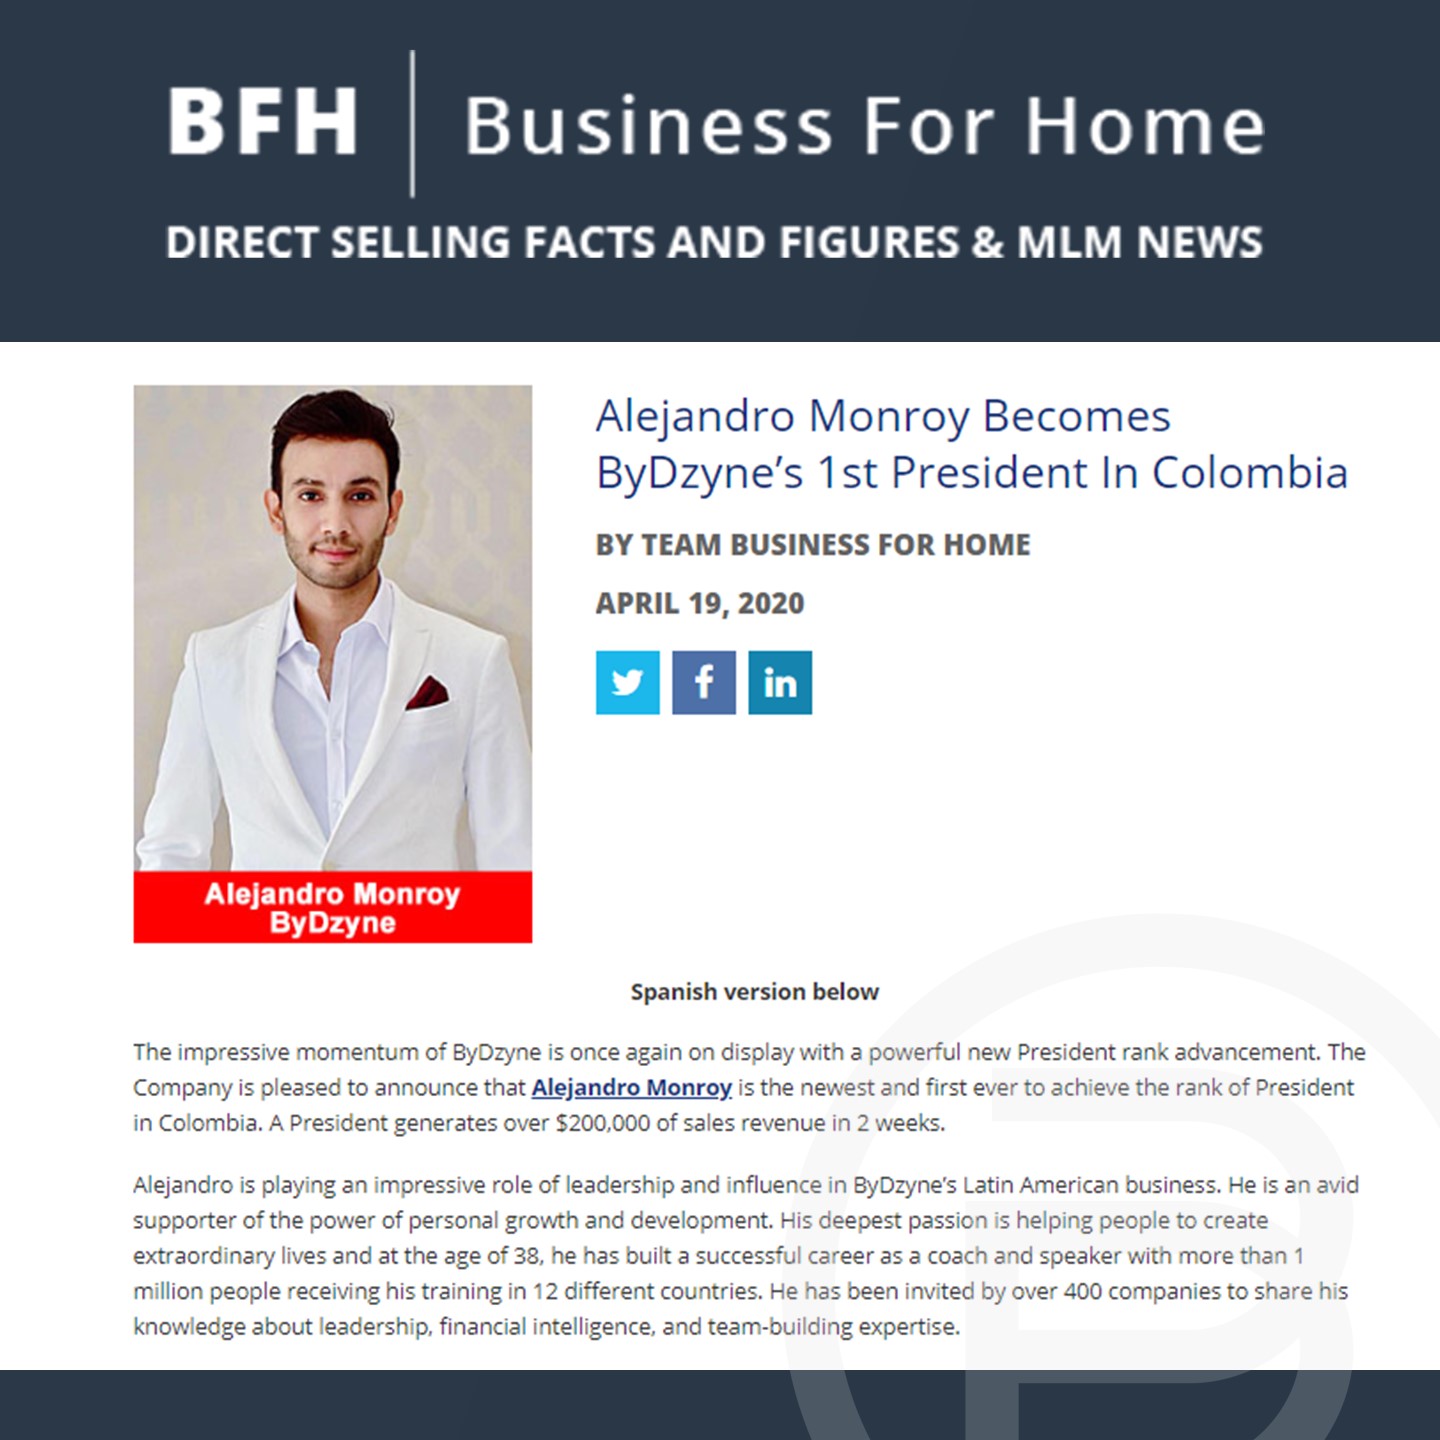 BFH: Alejandro Monroy Becomes ByDzyne’s 1st President In Colombia